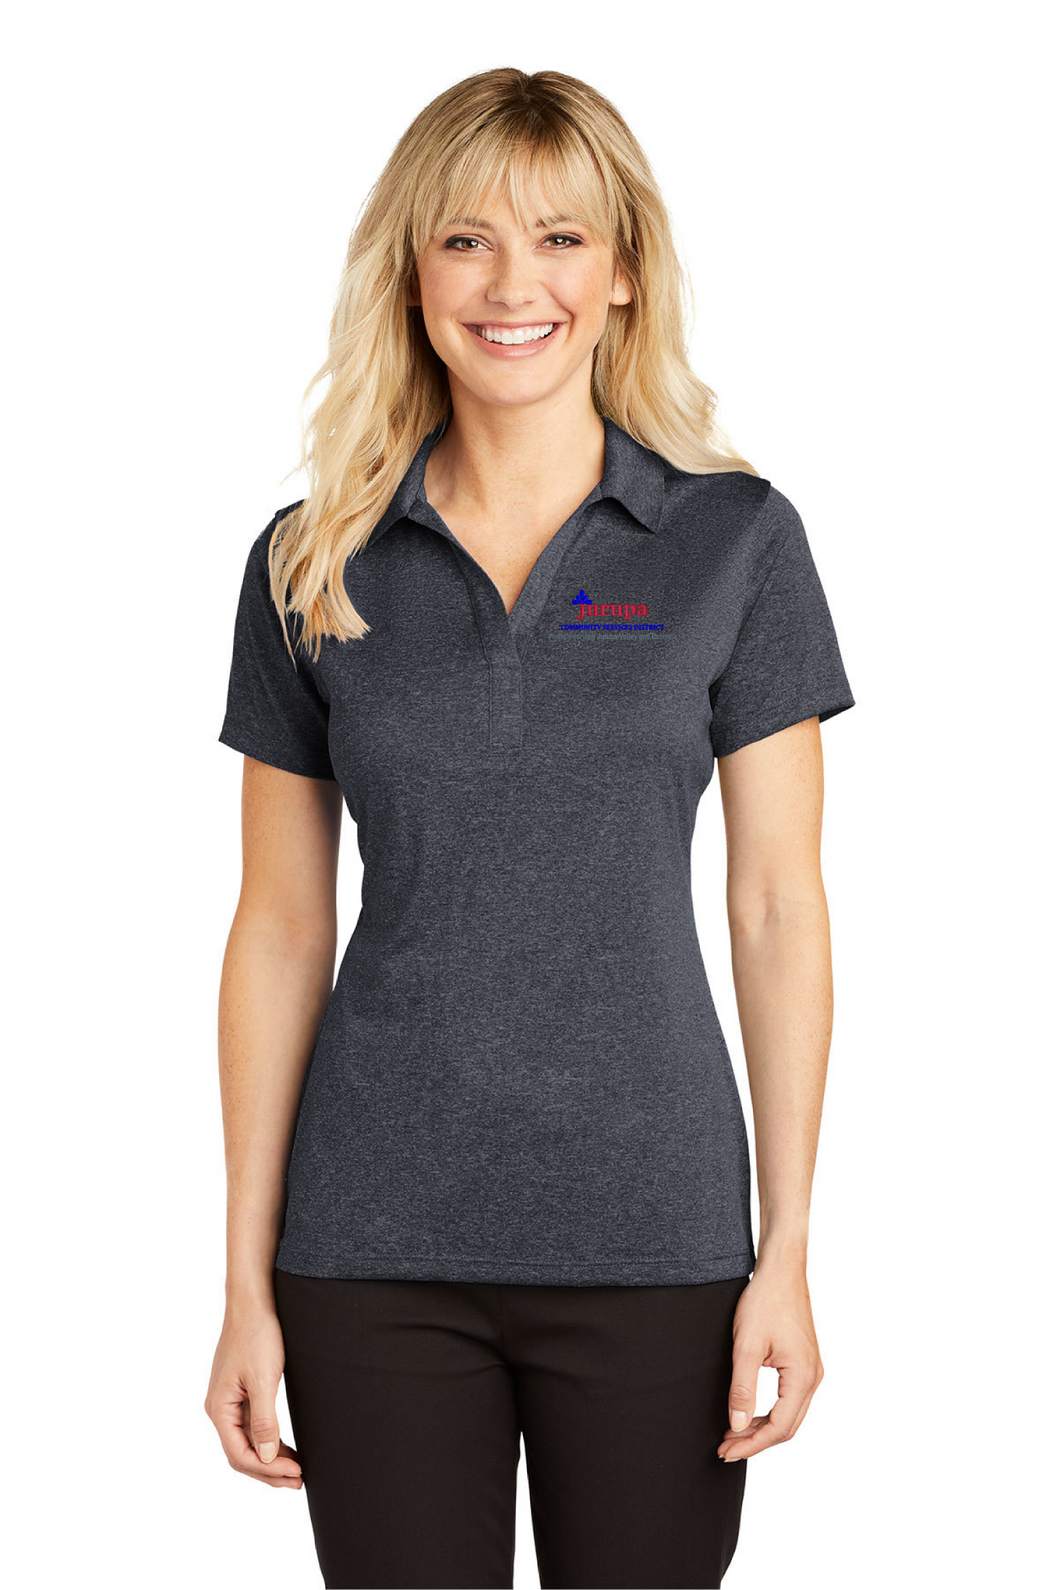 JCSD Ladies Heathered Contender Polo LST660